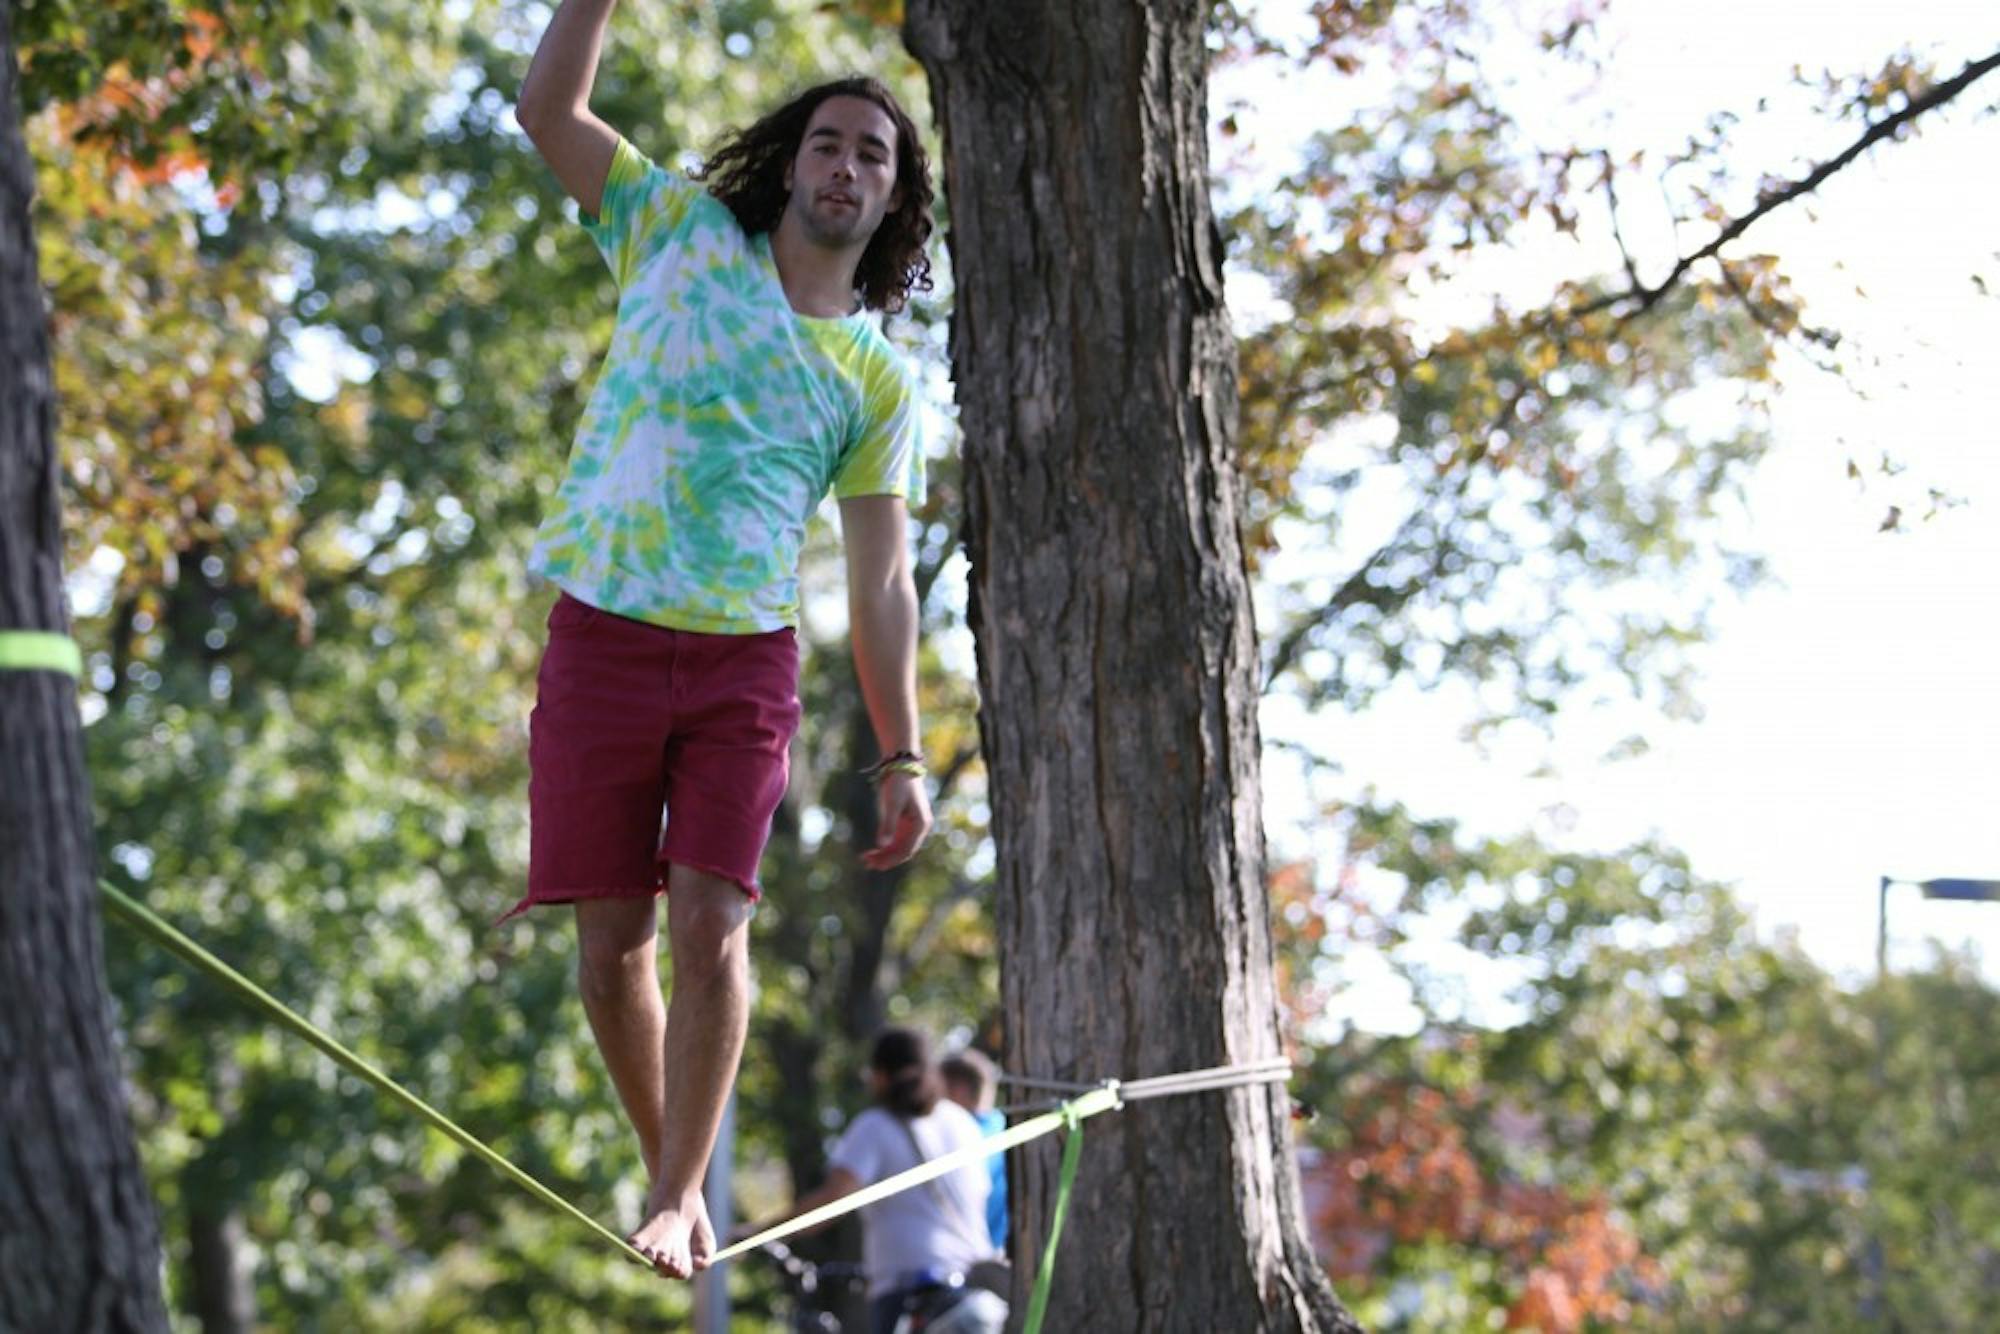 	Junior Joe Morris has been slack lining around campus since he discovered the sport his freshman year. The 20-year-old Morris reminds us that slack lining is not the same as tight rope walking. Unlike, tight rope walkers, slack liners balance on a rope that moves, which Morris said “makes it much harder.”